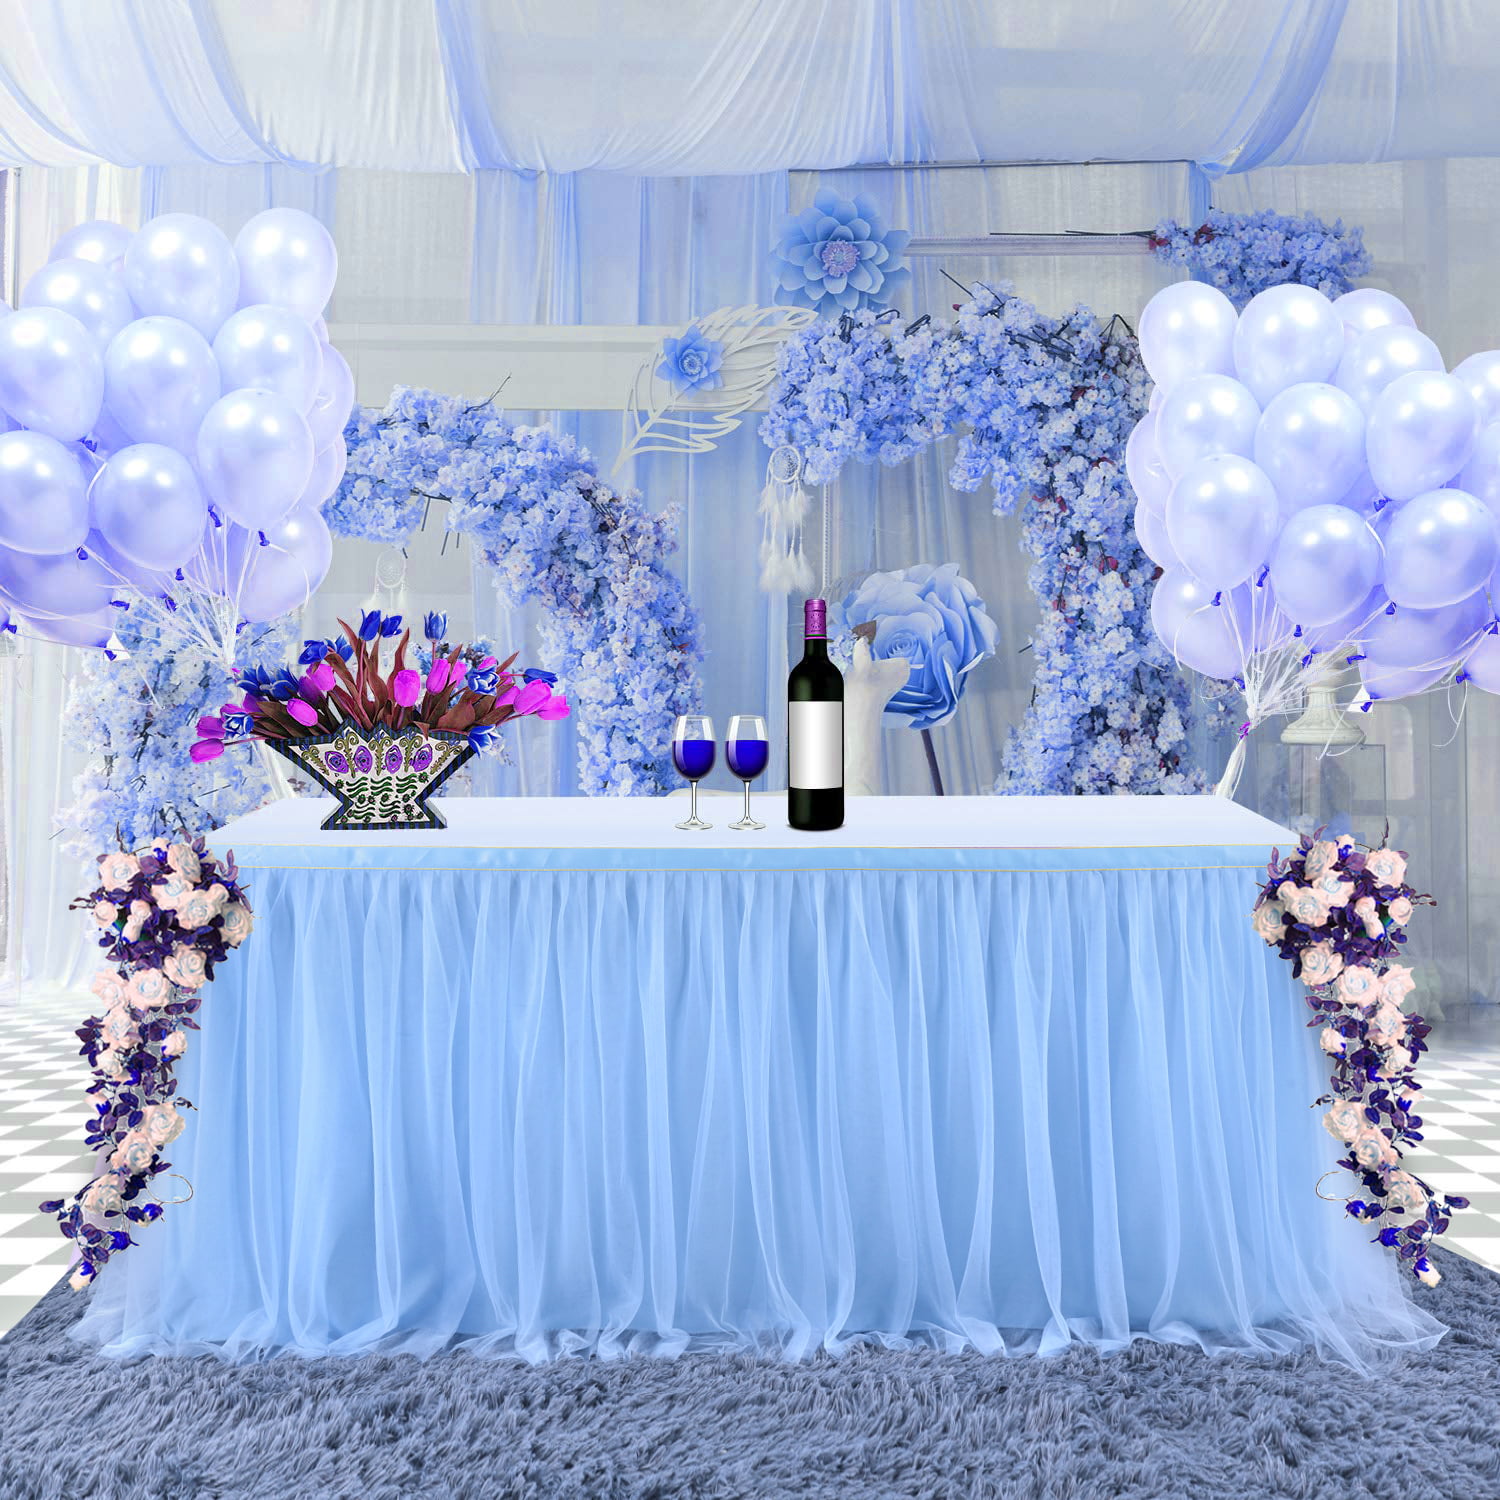  OSVINO 10ft Pearl Tablecloth Sky Blue Lace 63x120 inches Long  Beaded Tulle Dessert Table Cloth Romantic Wedding Veil Tulle Arch  Decorations Bridal Shower Holiday Birthday Party Decor : Home & Kitchen